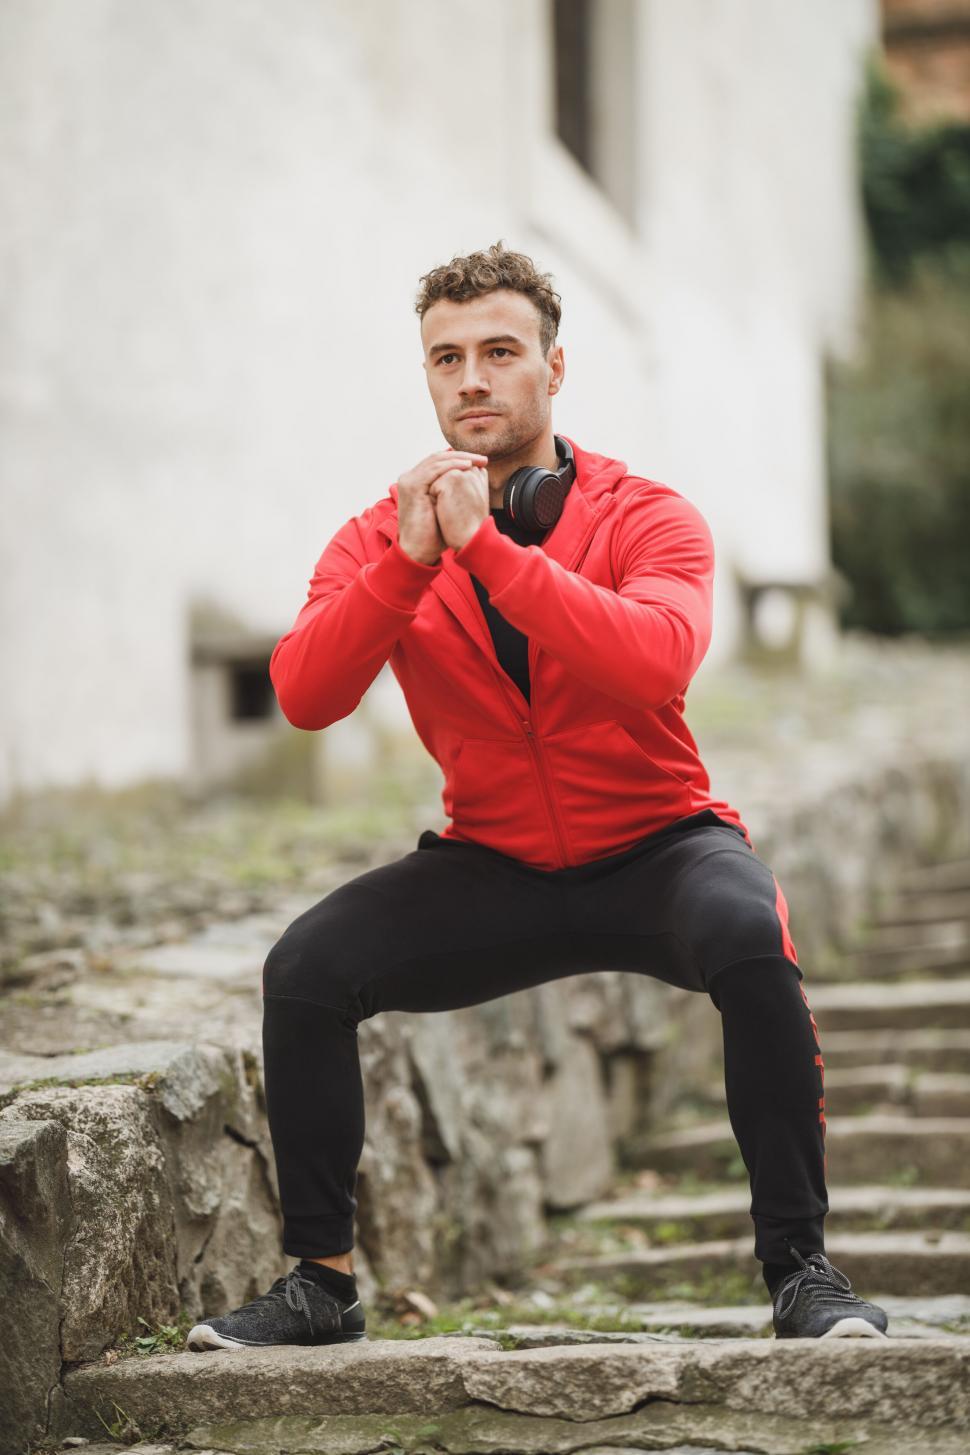 Free Image of Focused man doing squats on steps 